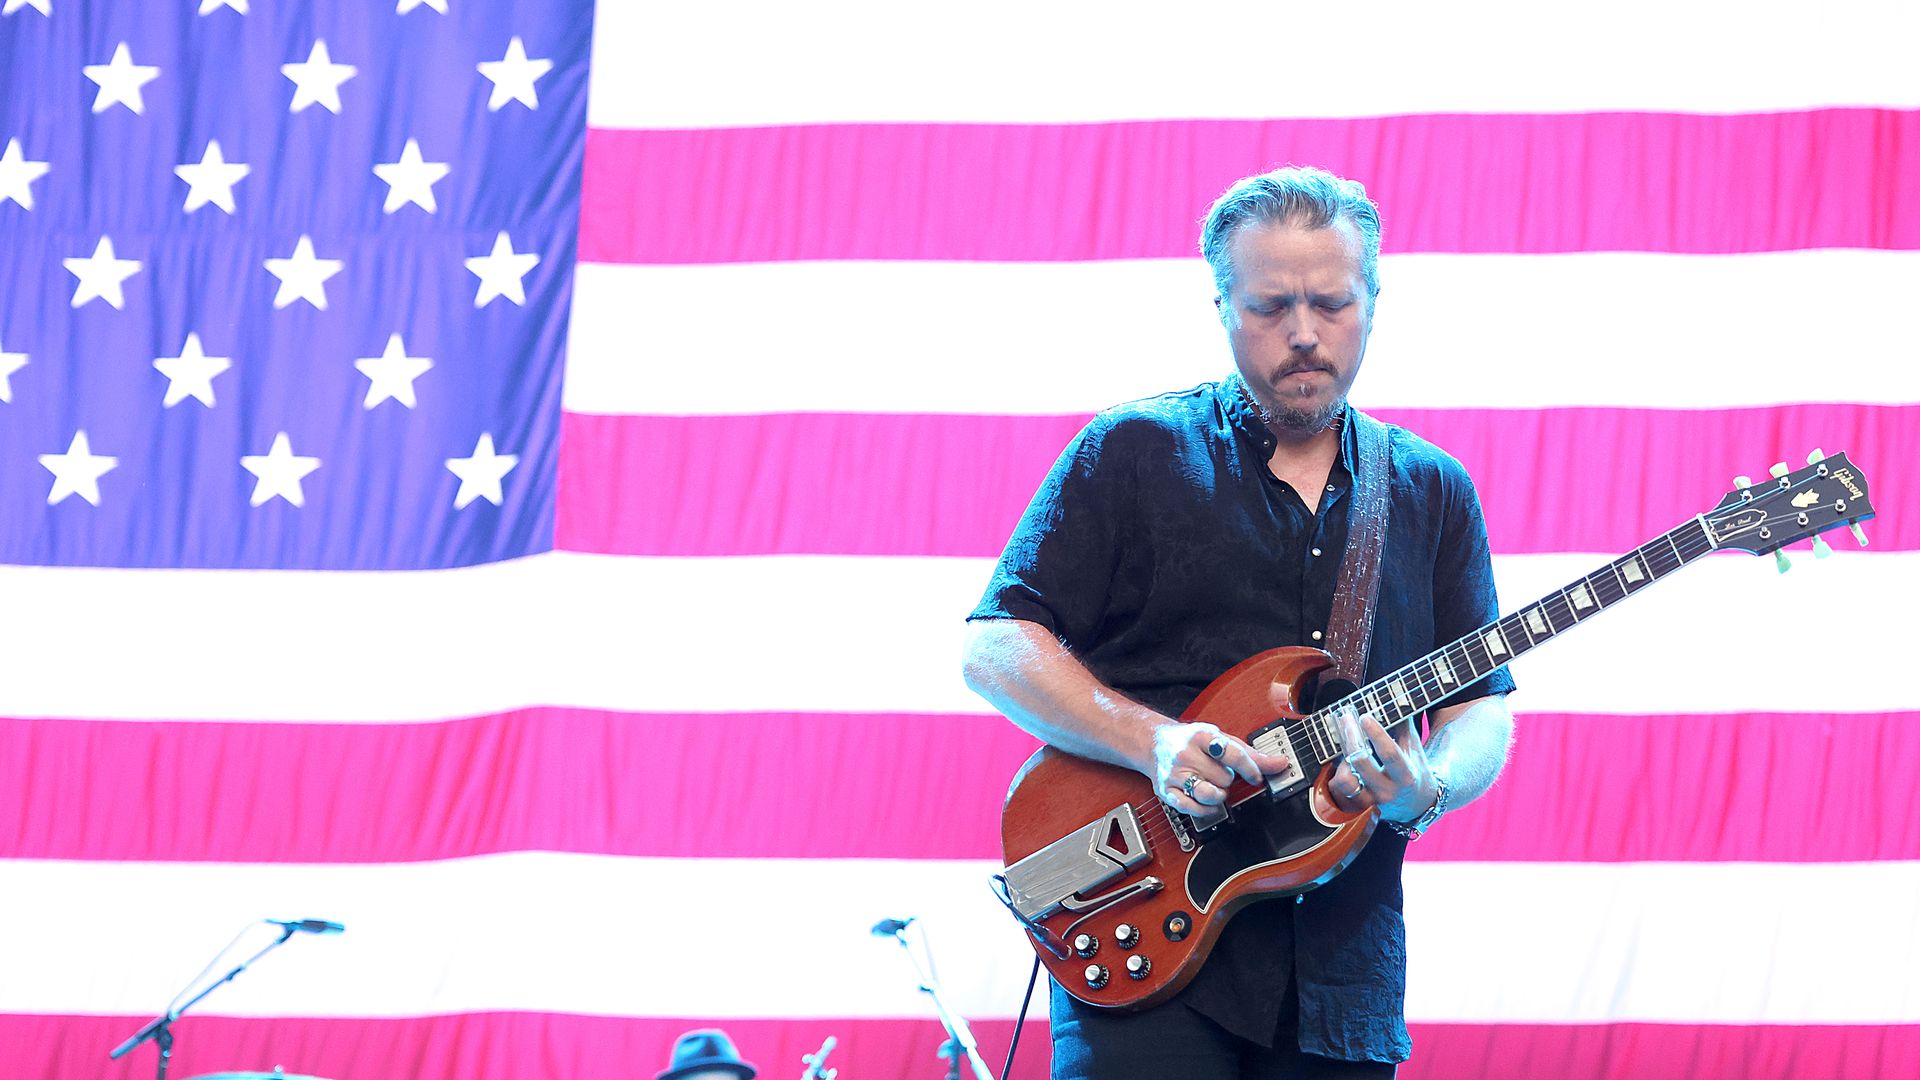 Musician Jason Isbell plays a guitar in front of a giant American flag